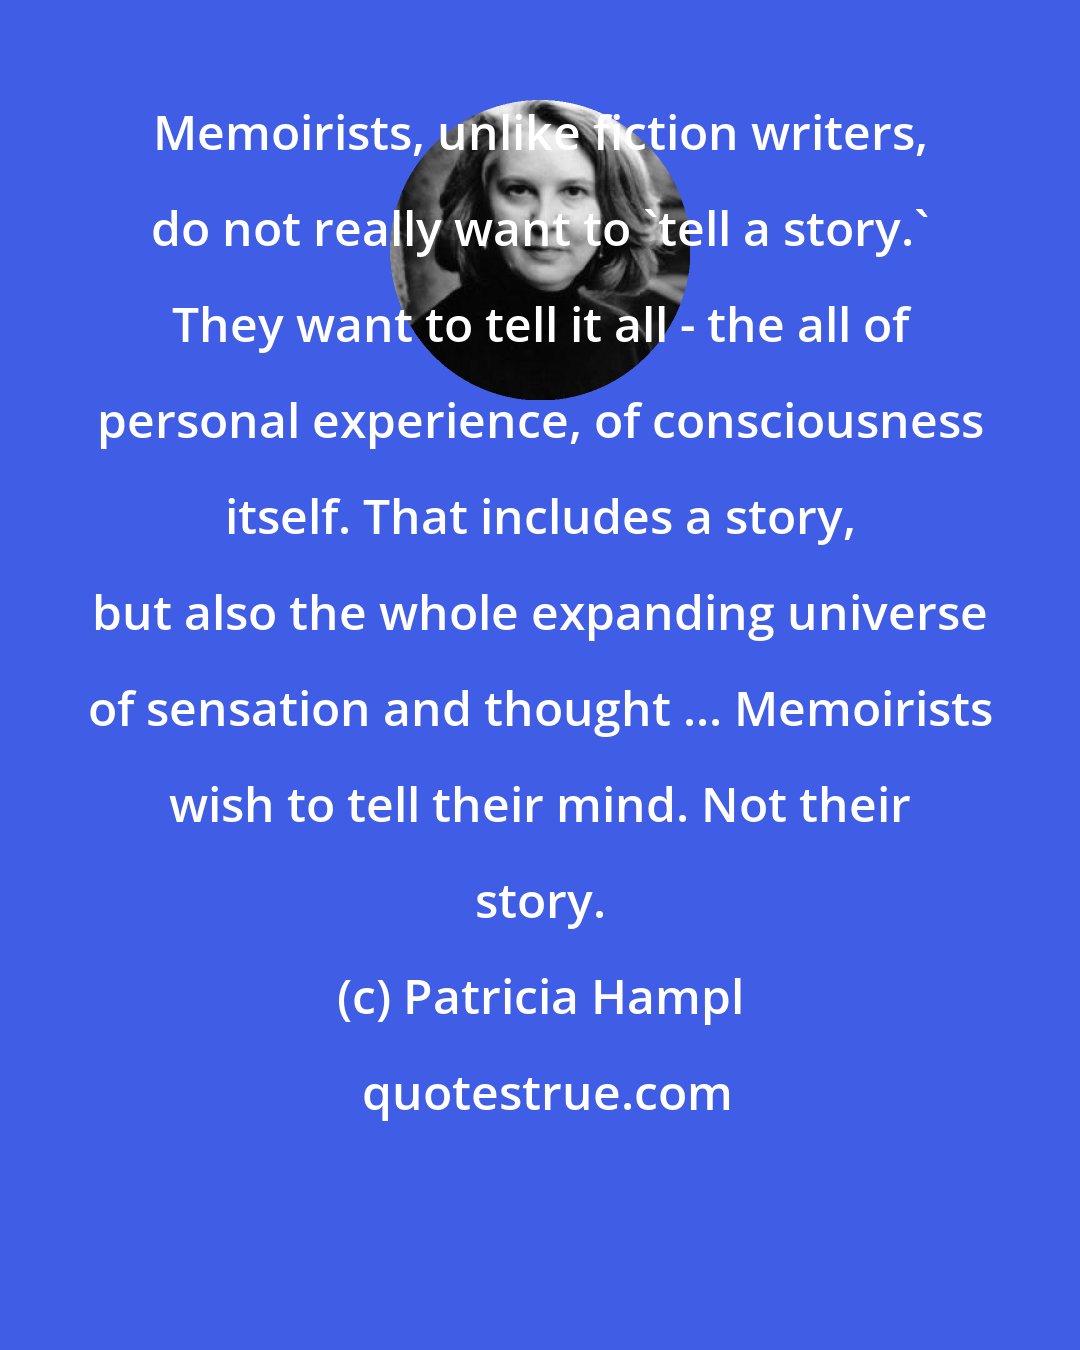 Patricia Hampl: Memoirists, unlike fiction writers, do not really want to 'tell a story.' They want to tell it all - the all of personal experience, of consciousness itself. That includes a story, but also the whole expanding universe of sensation and thought ... Memoirists wish to tell their mind. Not their story.